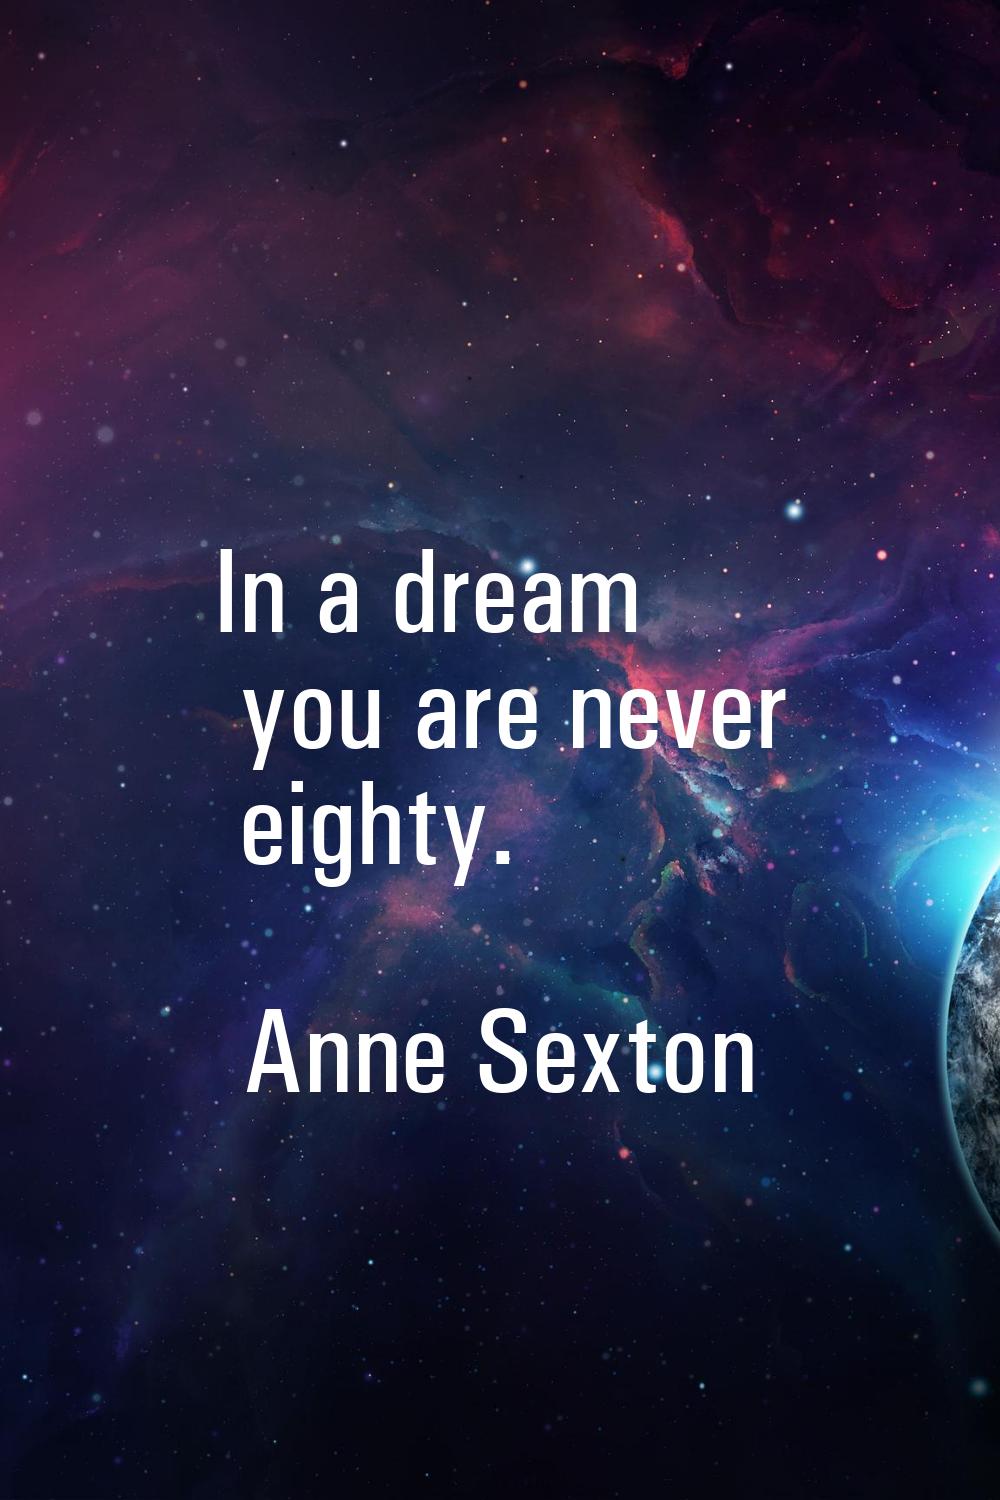 In a dream you are never eighty.